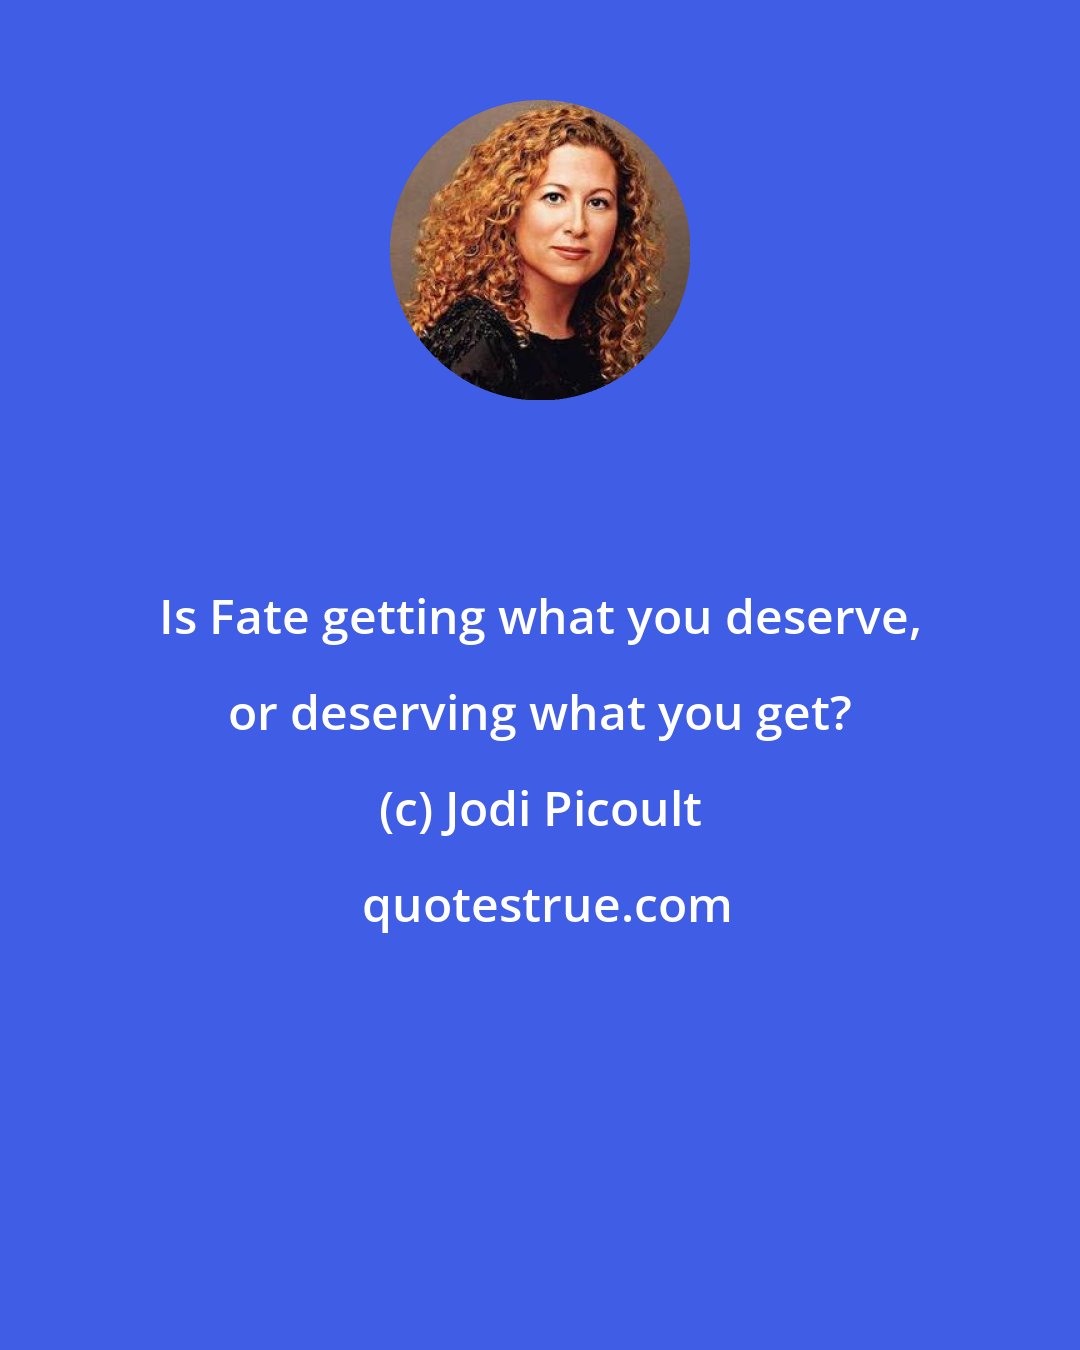 Jodi Picoult: Is Fate getting what you deserve, or deserving what you get?